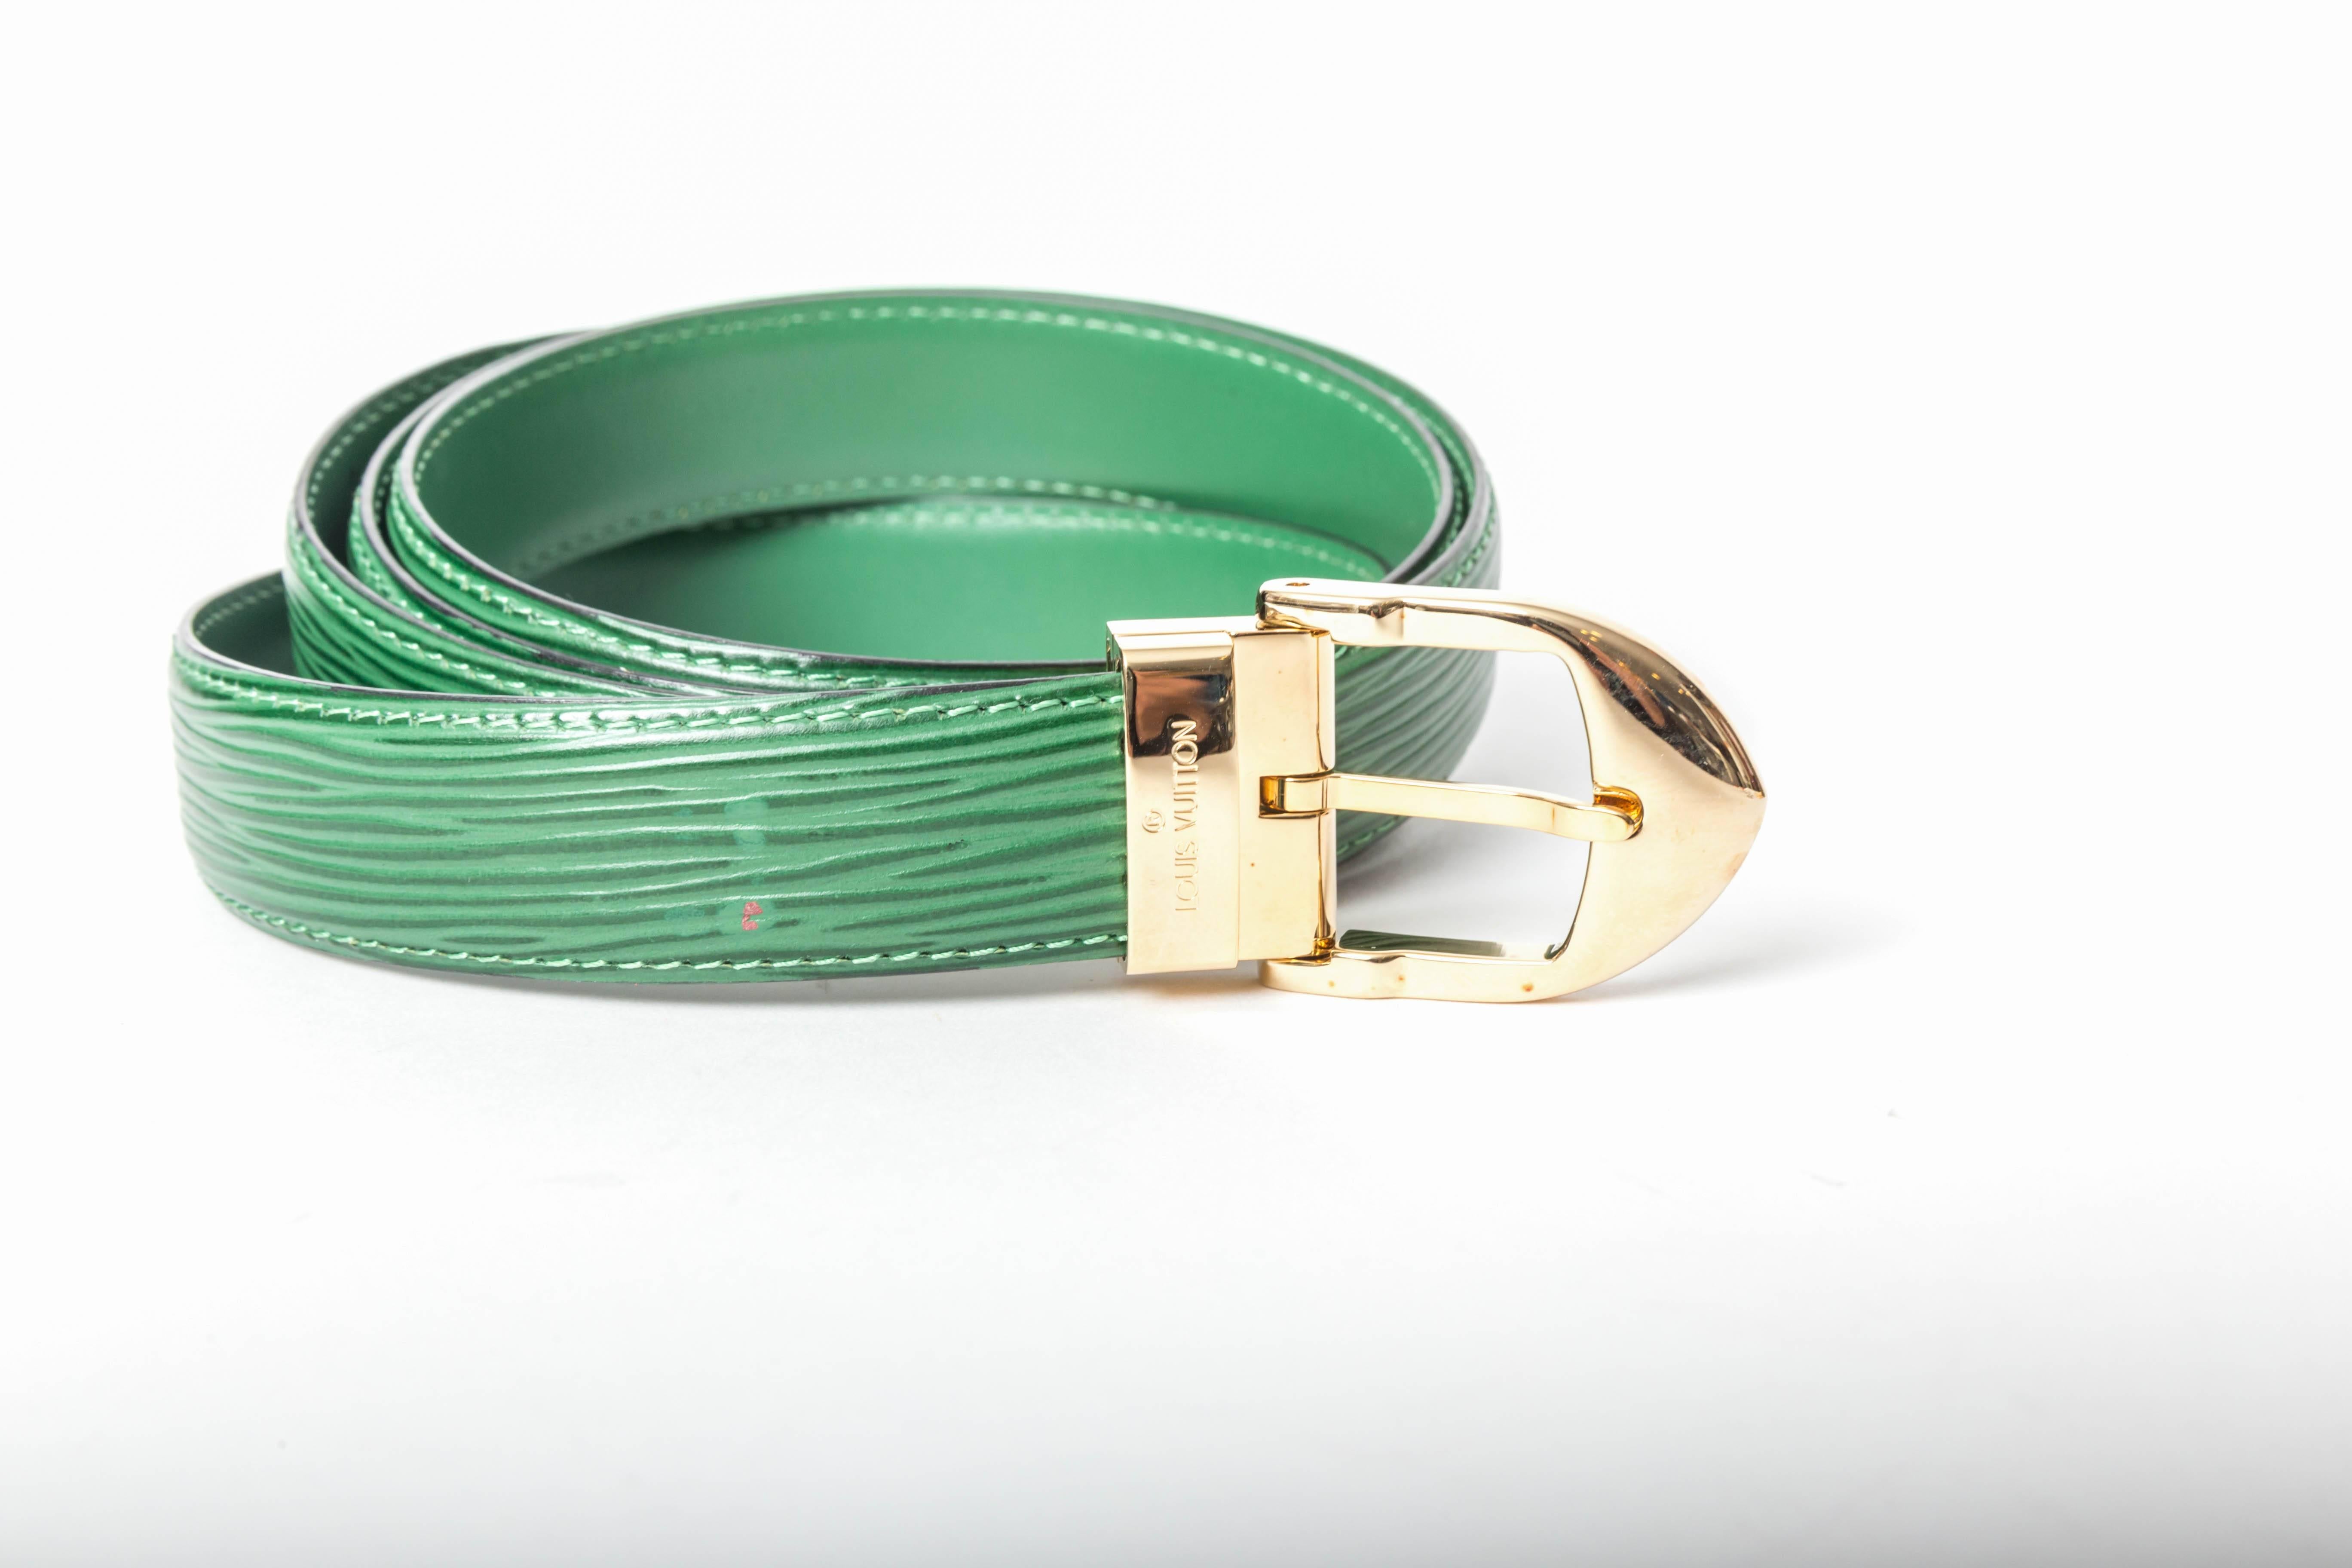 Louis Vuitton Green Epi Belt with Silver and Gold Buckles / New With Box - 44 2